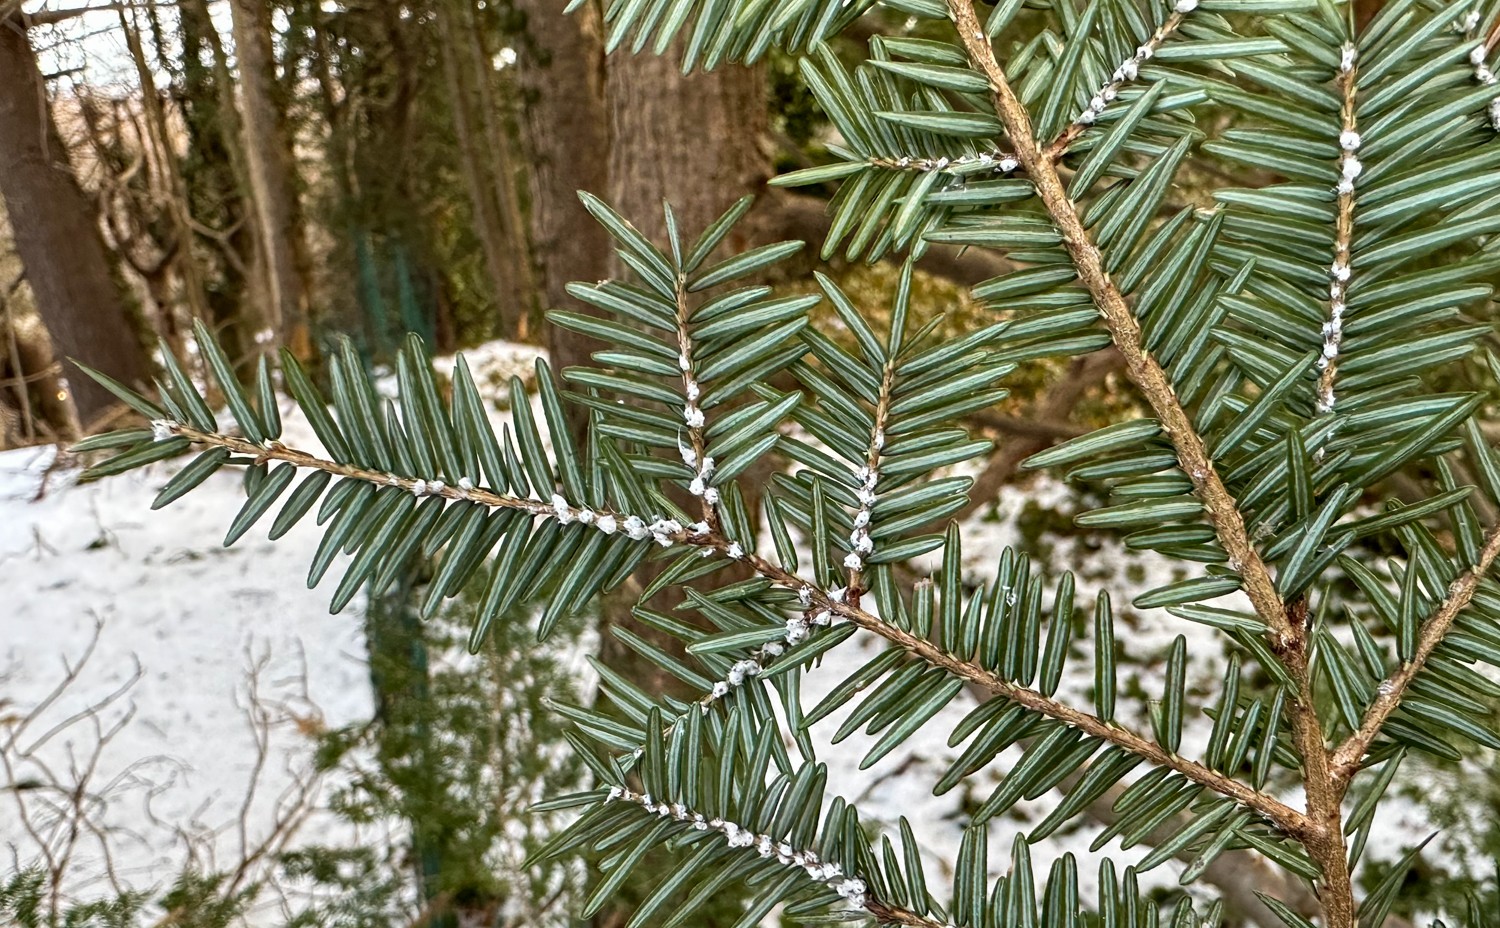 Scouting For The Hemlock Woolly Adelgid in Rochester - Featured Image